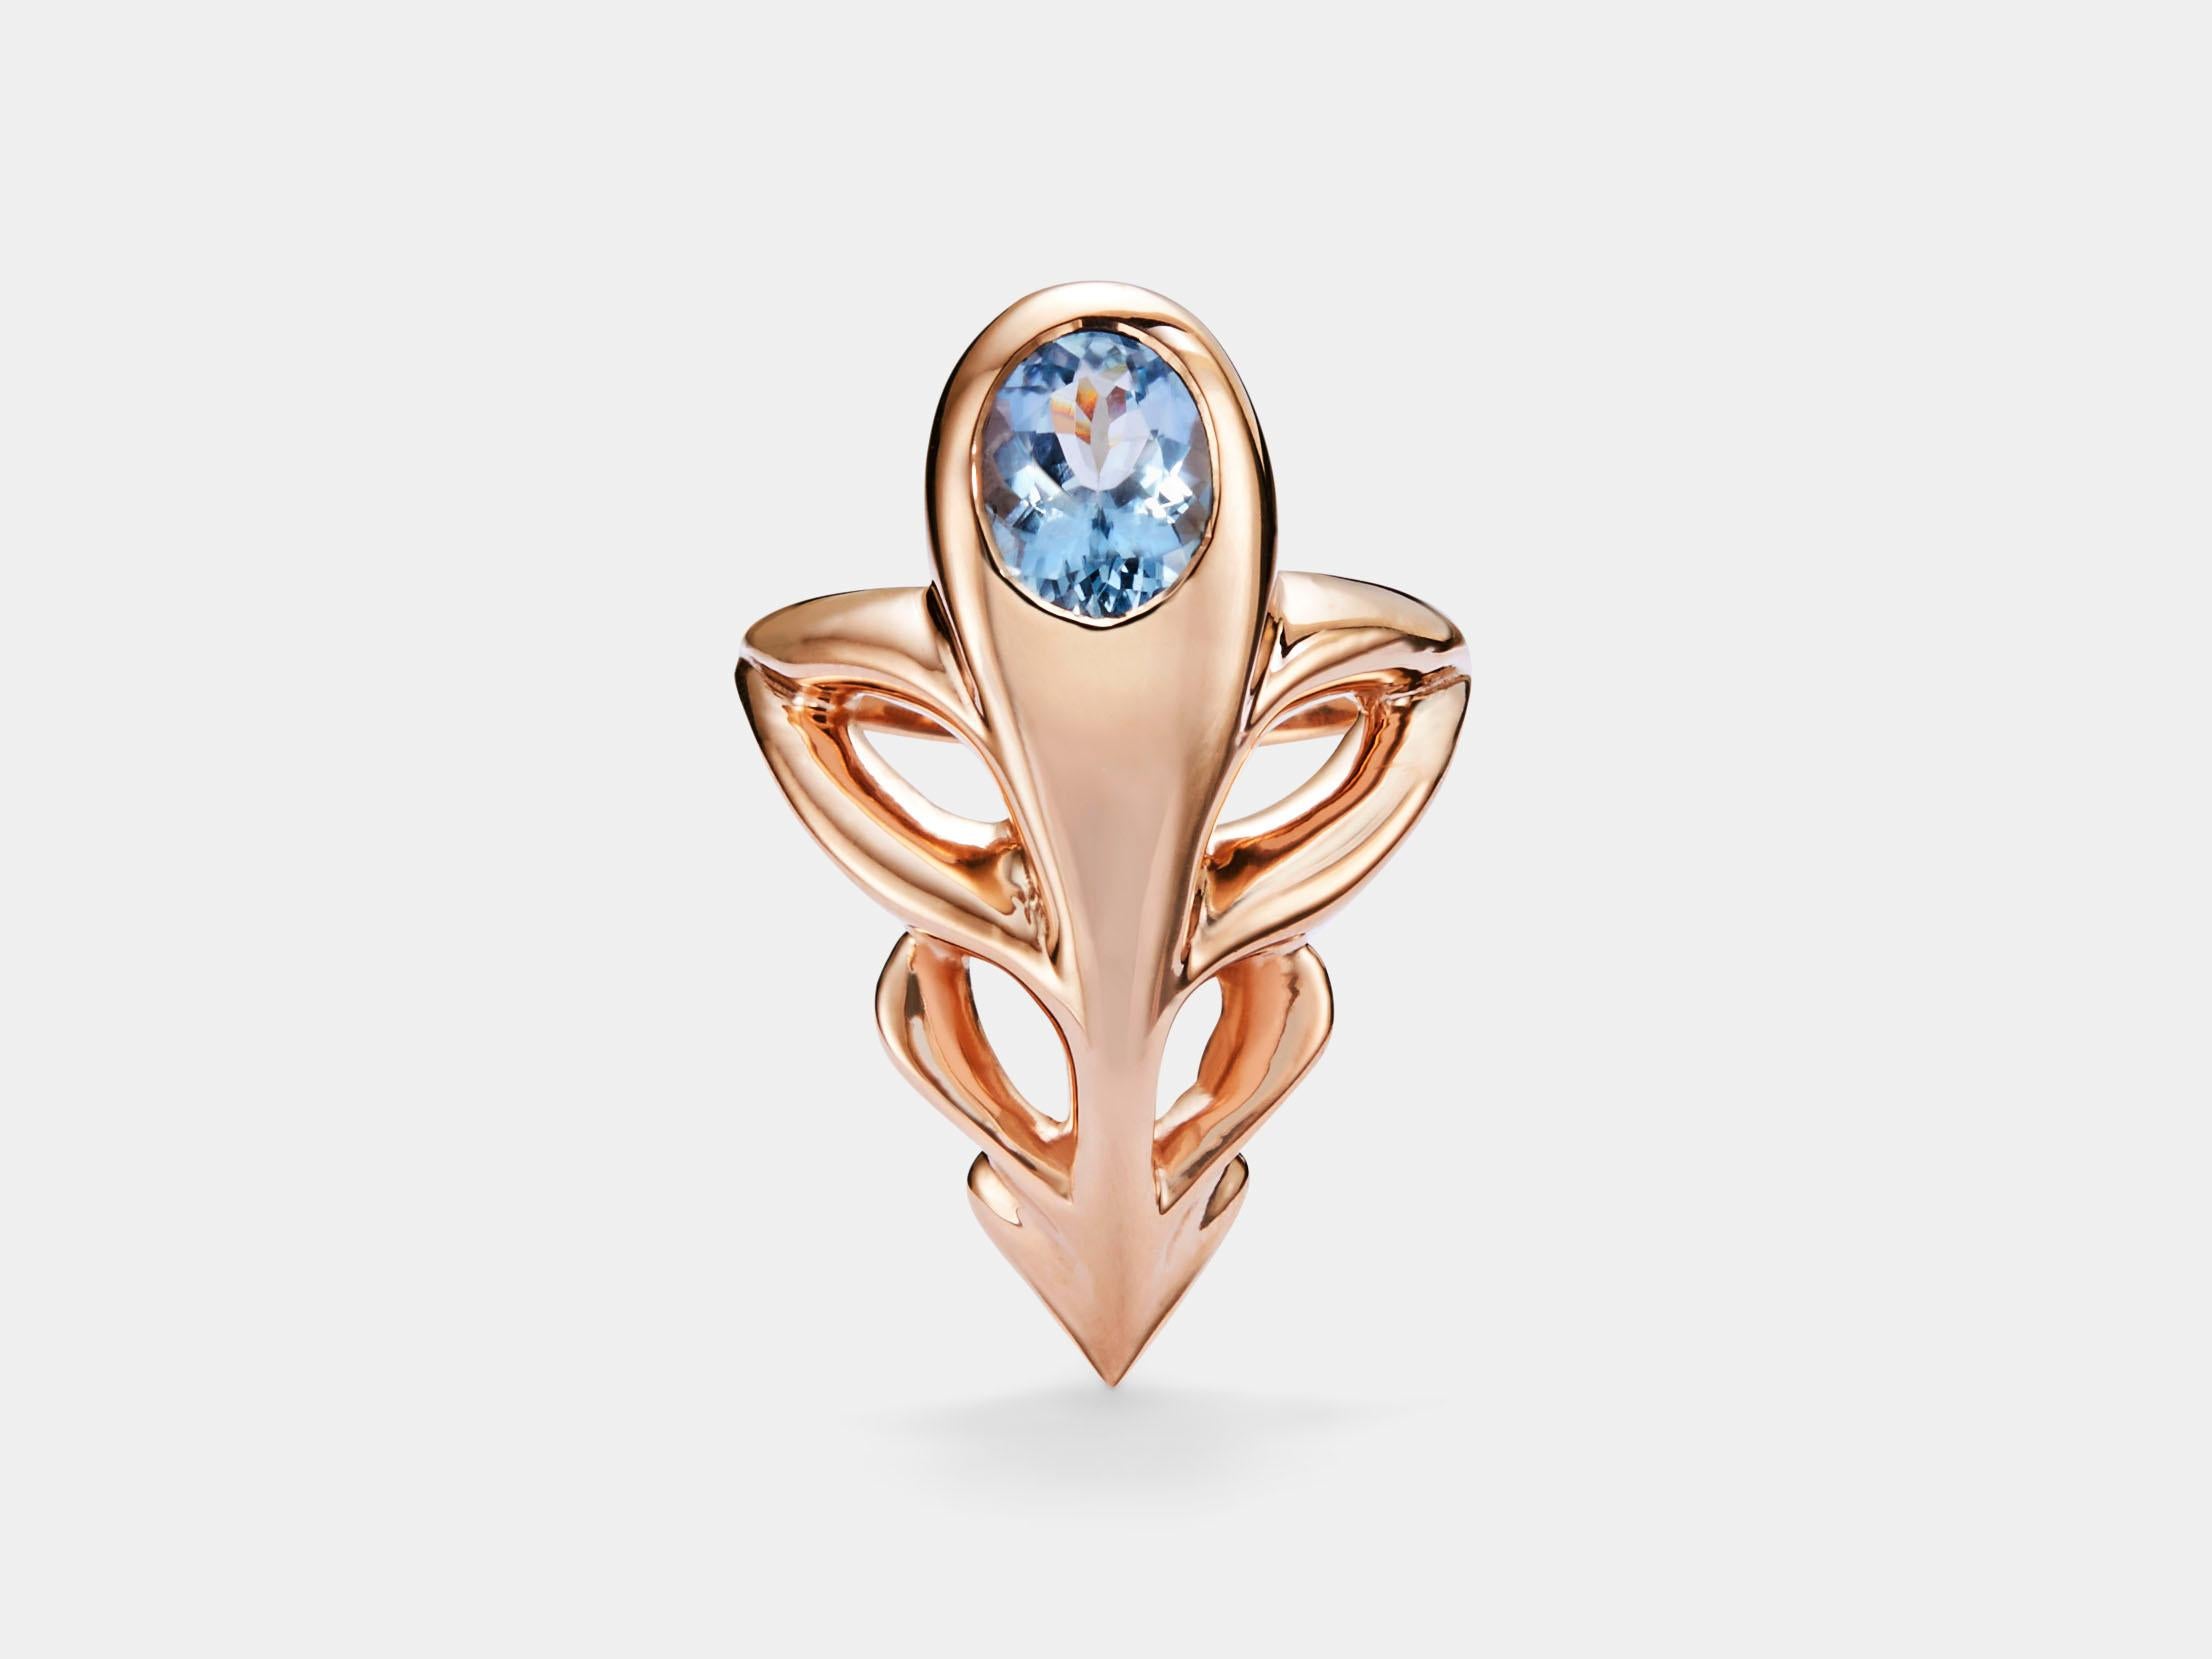 The Caduceus Ring with Blue Zircon from modern fine jewelry house, Baker & Black. A cocktail ring featuring an elongated openwork design that sits nice and low on the finger.

• blue zircon 
• measure 28mm (1 ⅛